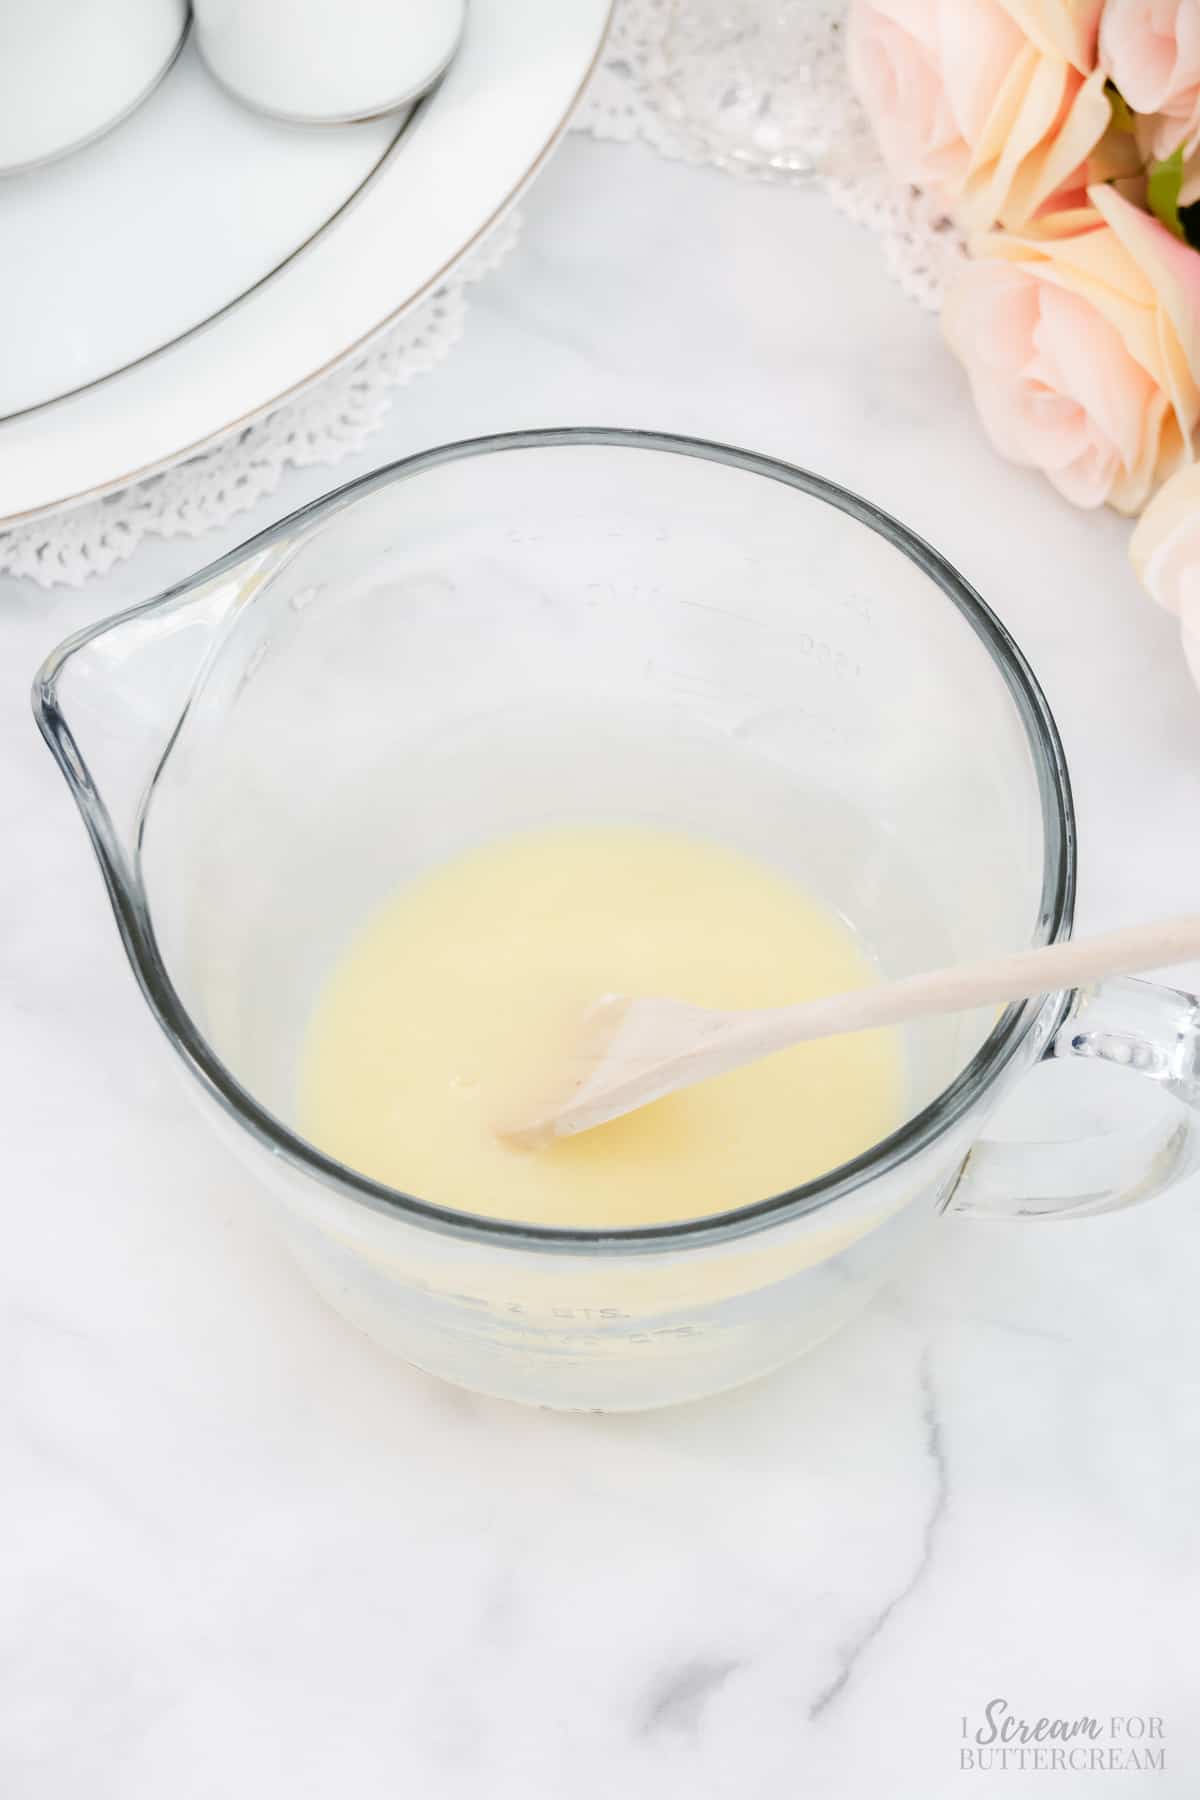 White chocolate ganache melted in a glass bowl with a spoon.